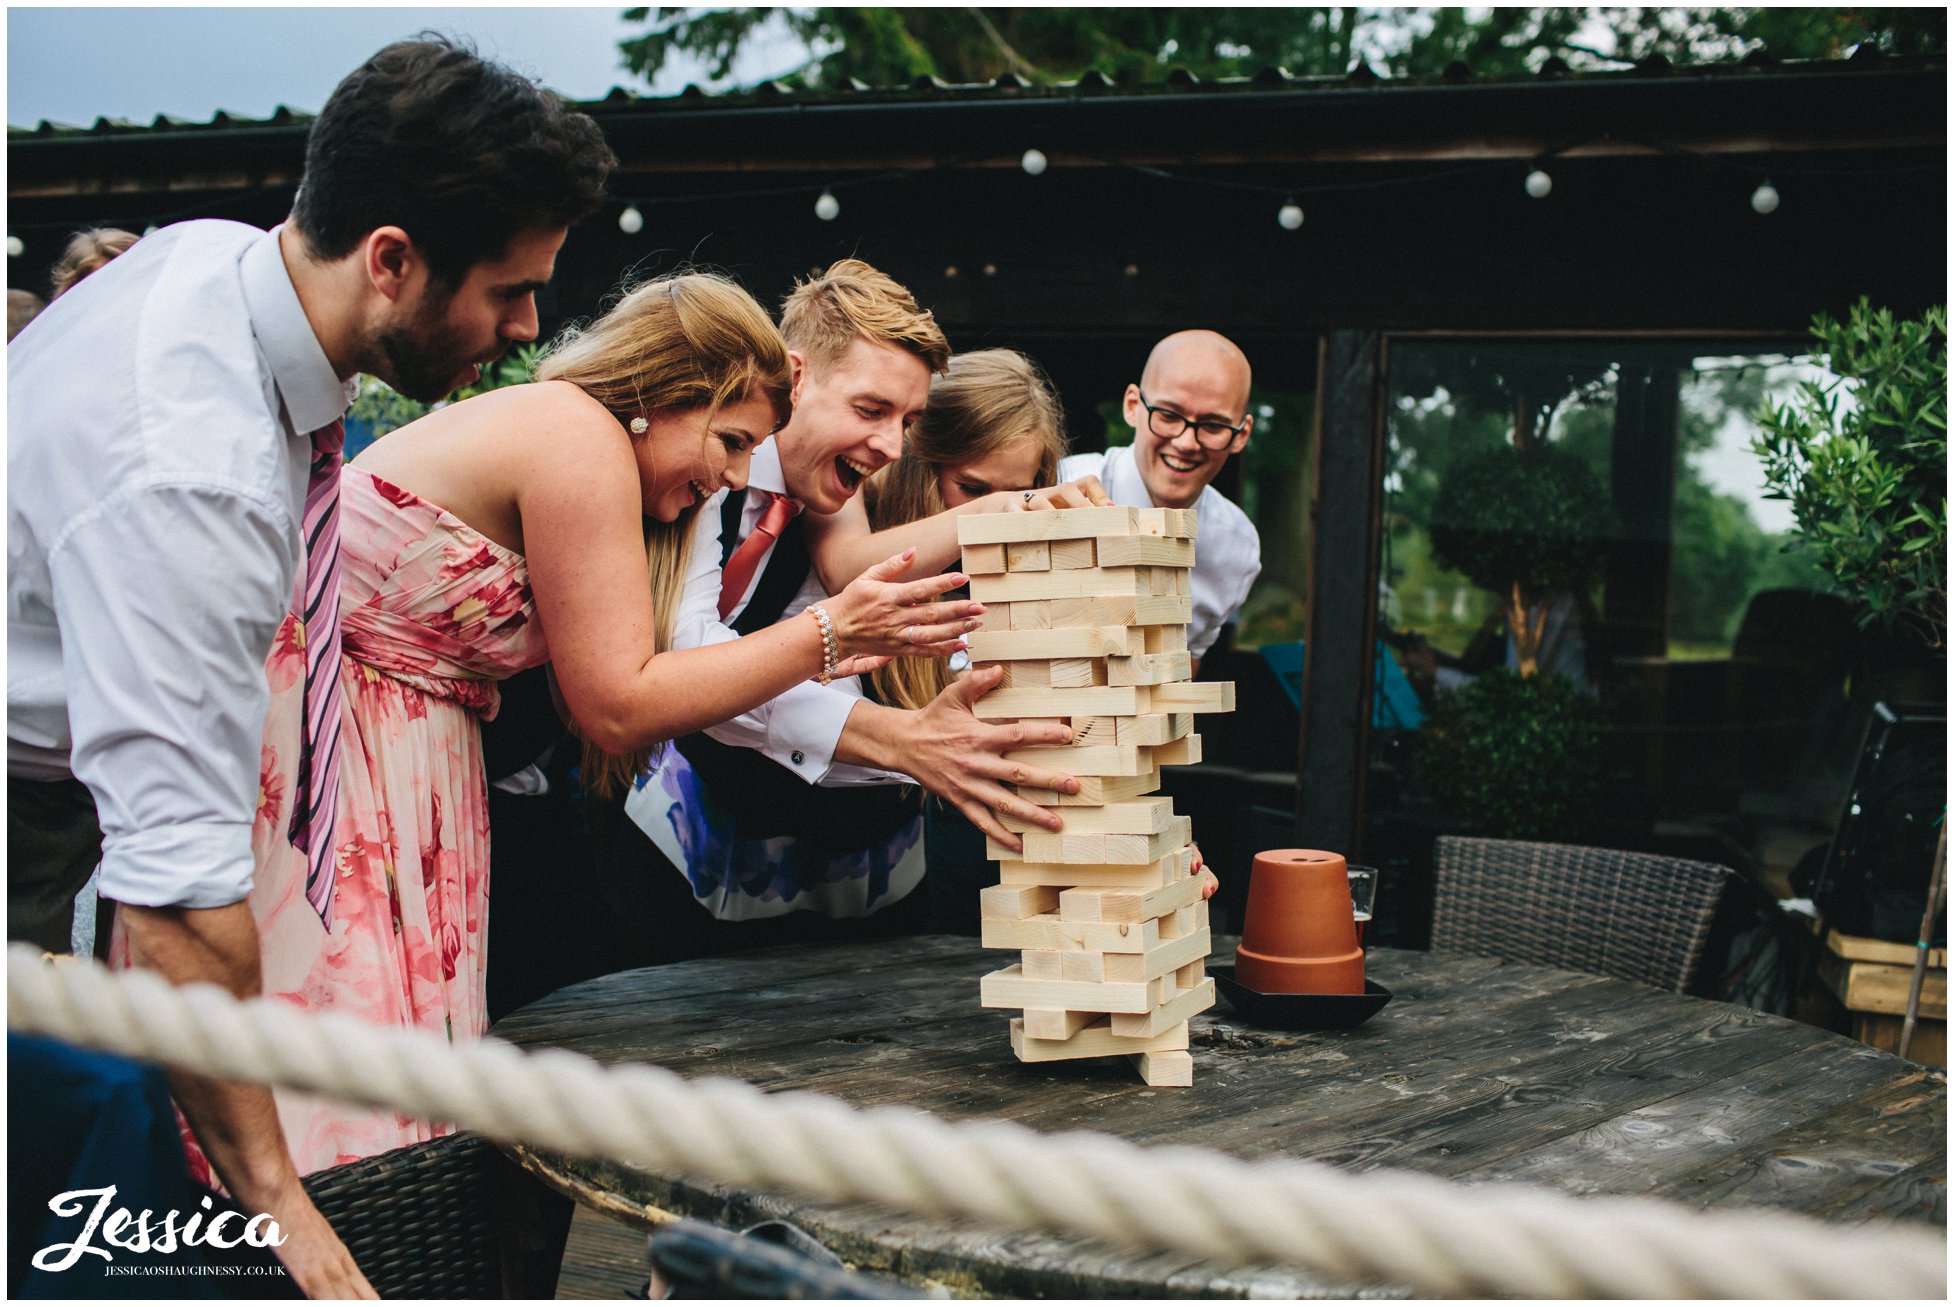 guests play jenga during a wedding in north wales